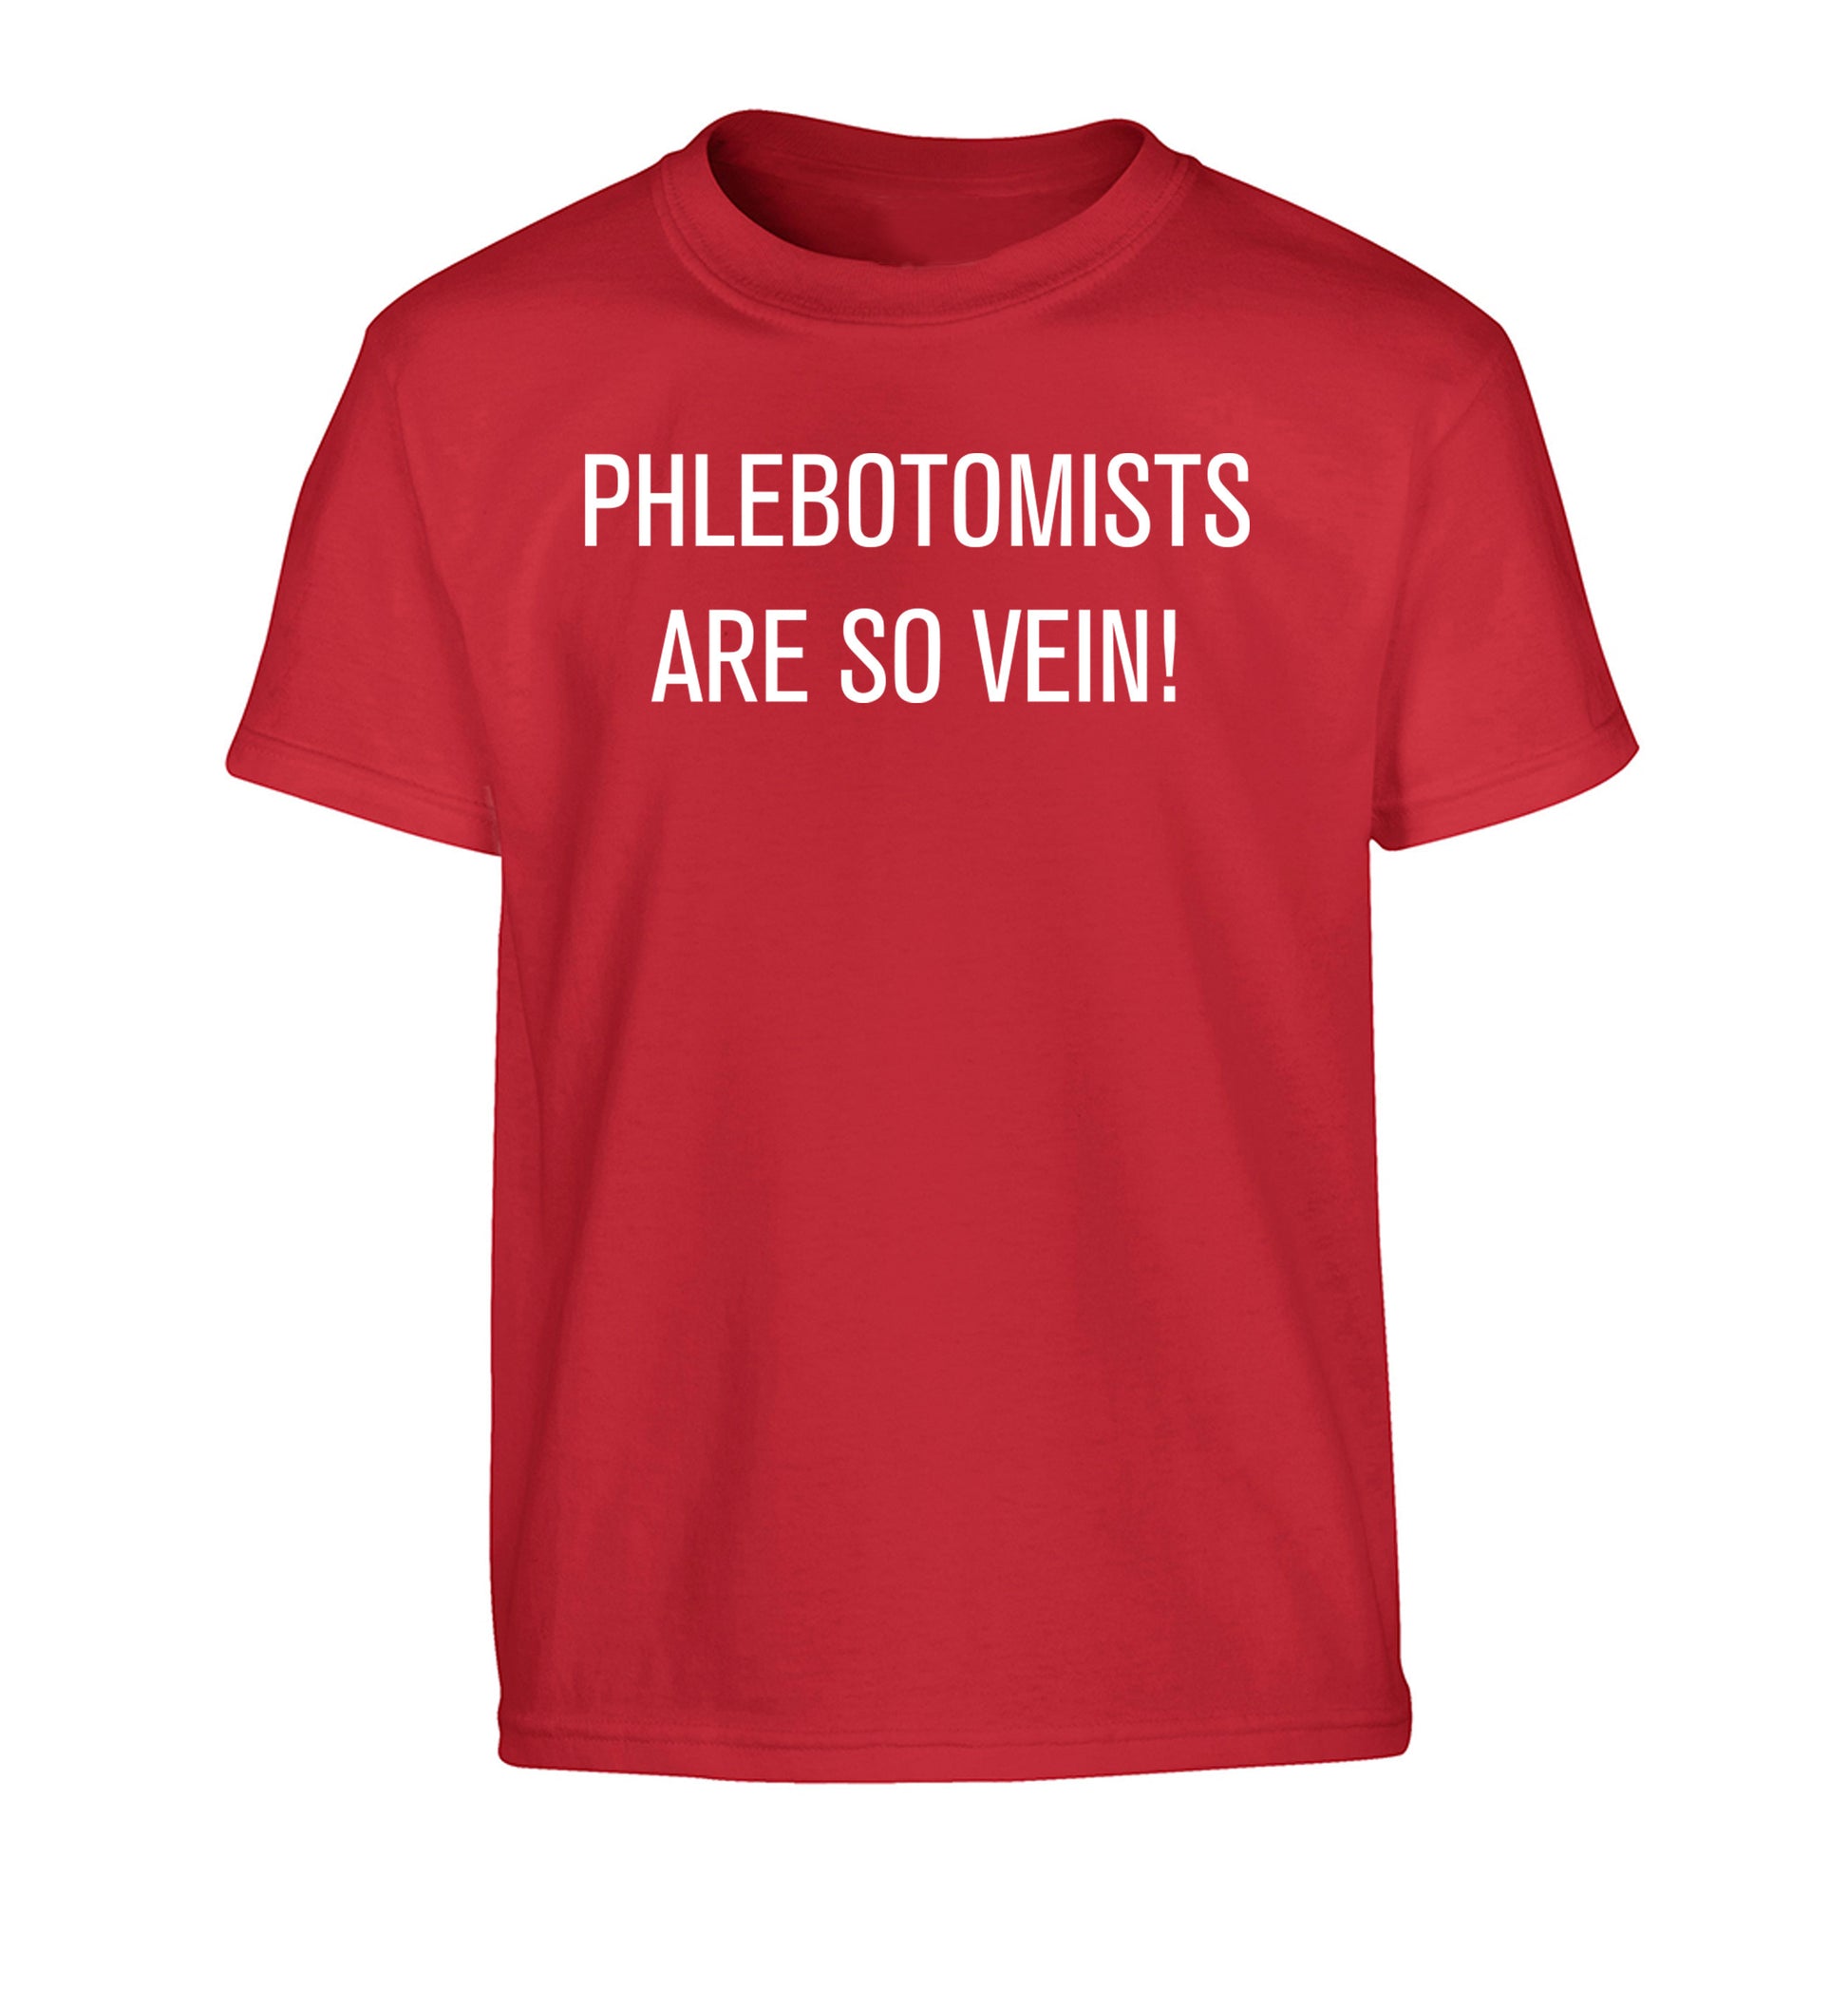 Phlebotomists are so vein! Children's red Tshirt 12-14 Years